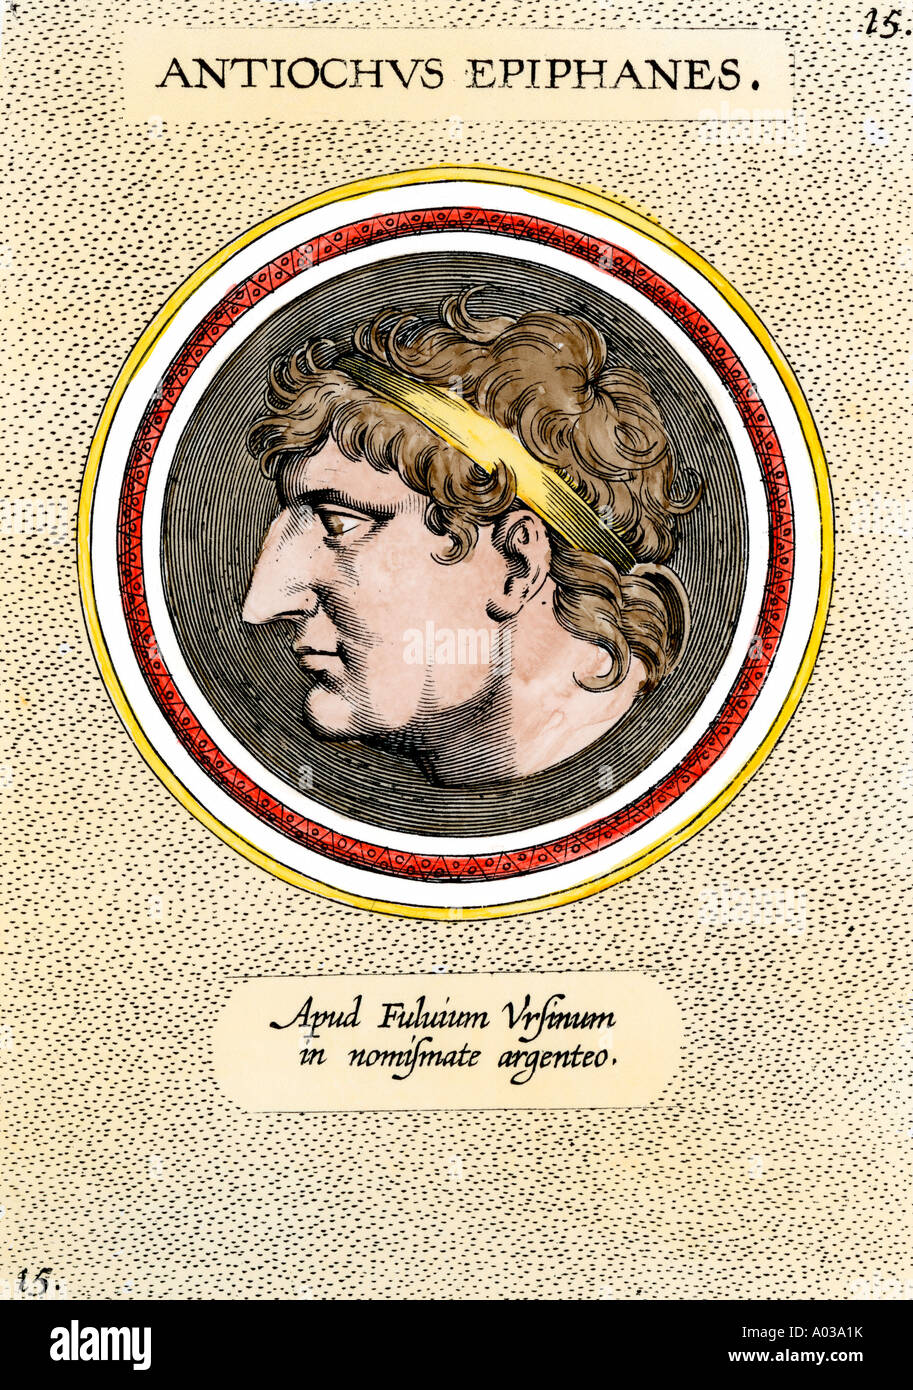 Antiochus IV or Antiochus Epiphanes King of the Seleucid kingdom of Syria. Hand-colored etching Stock Photo